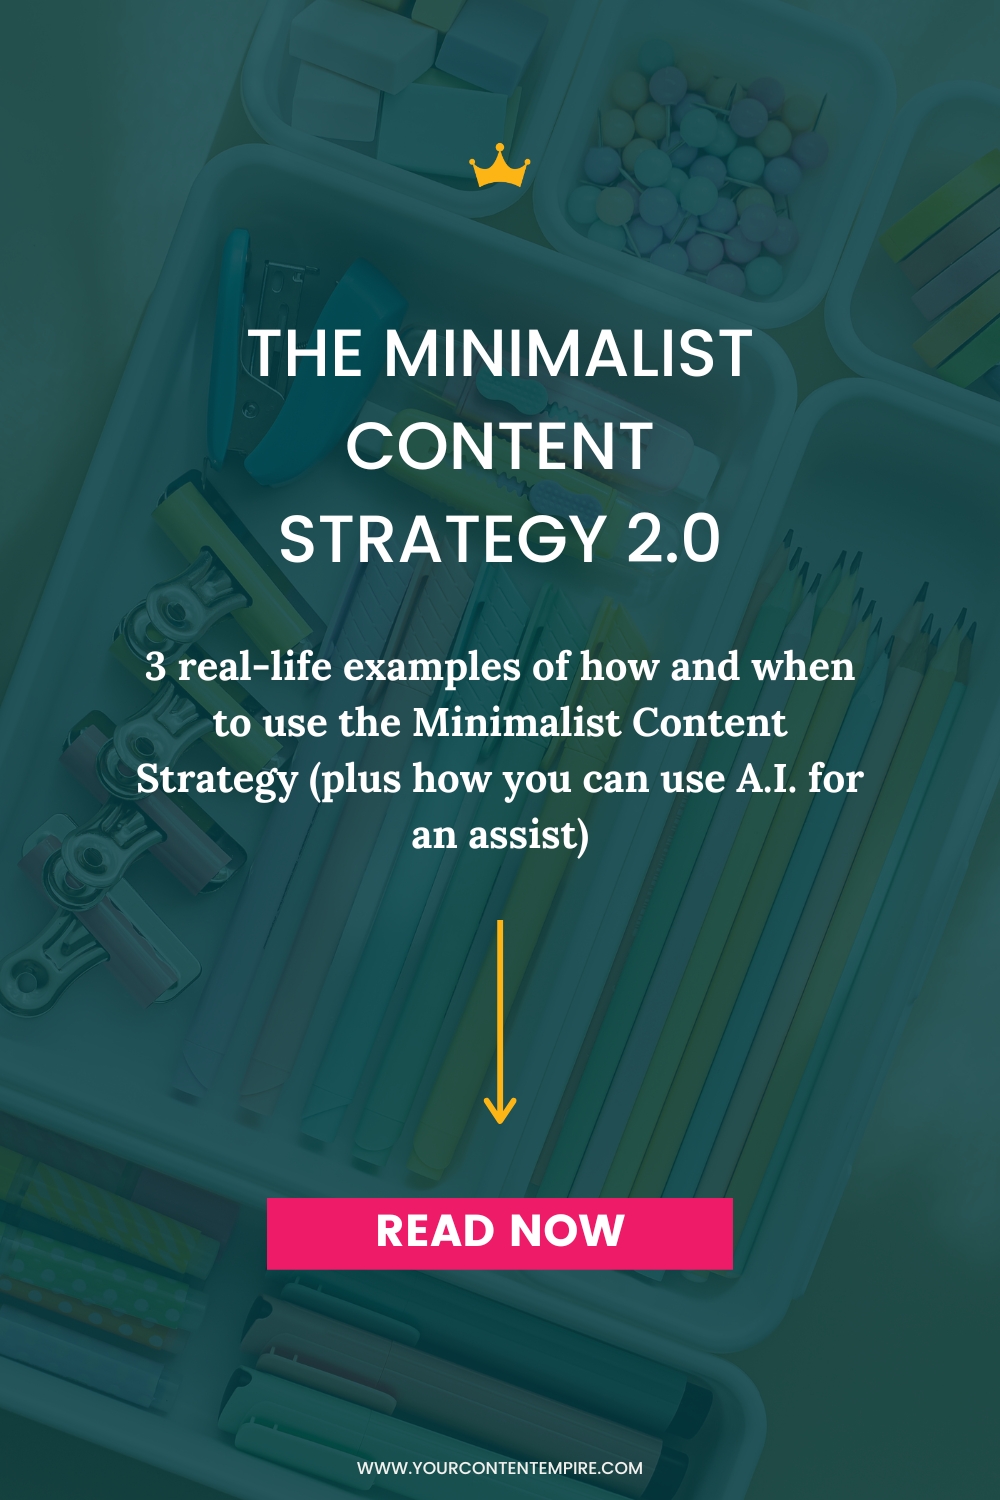 The Minimalist Content Strategy 2.0